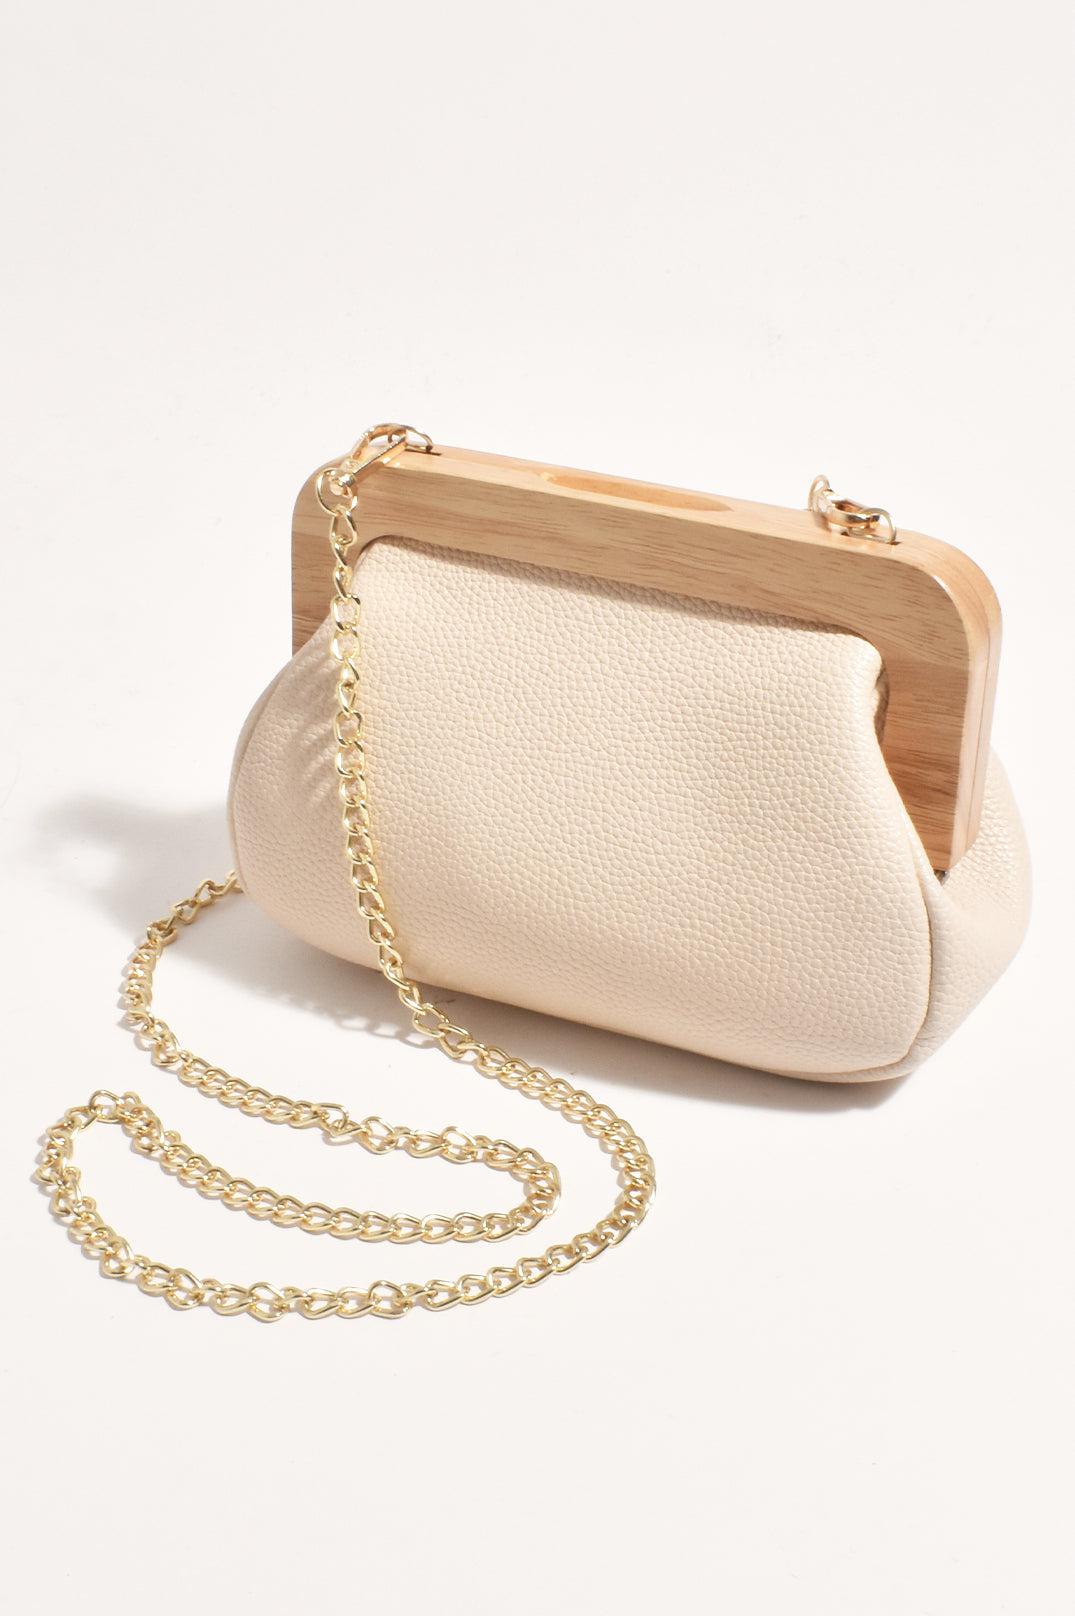 Kimmi Timber Frame Clutch - Nude-Bags & Clutches-Adorne-The Bay Room